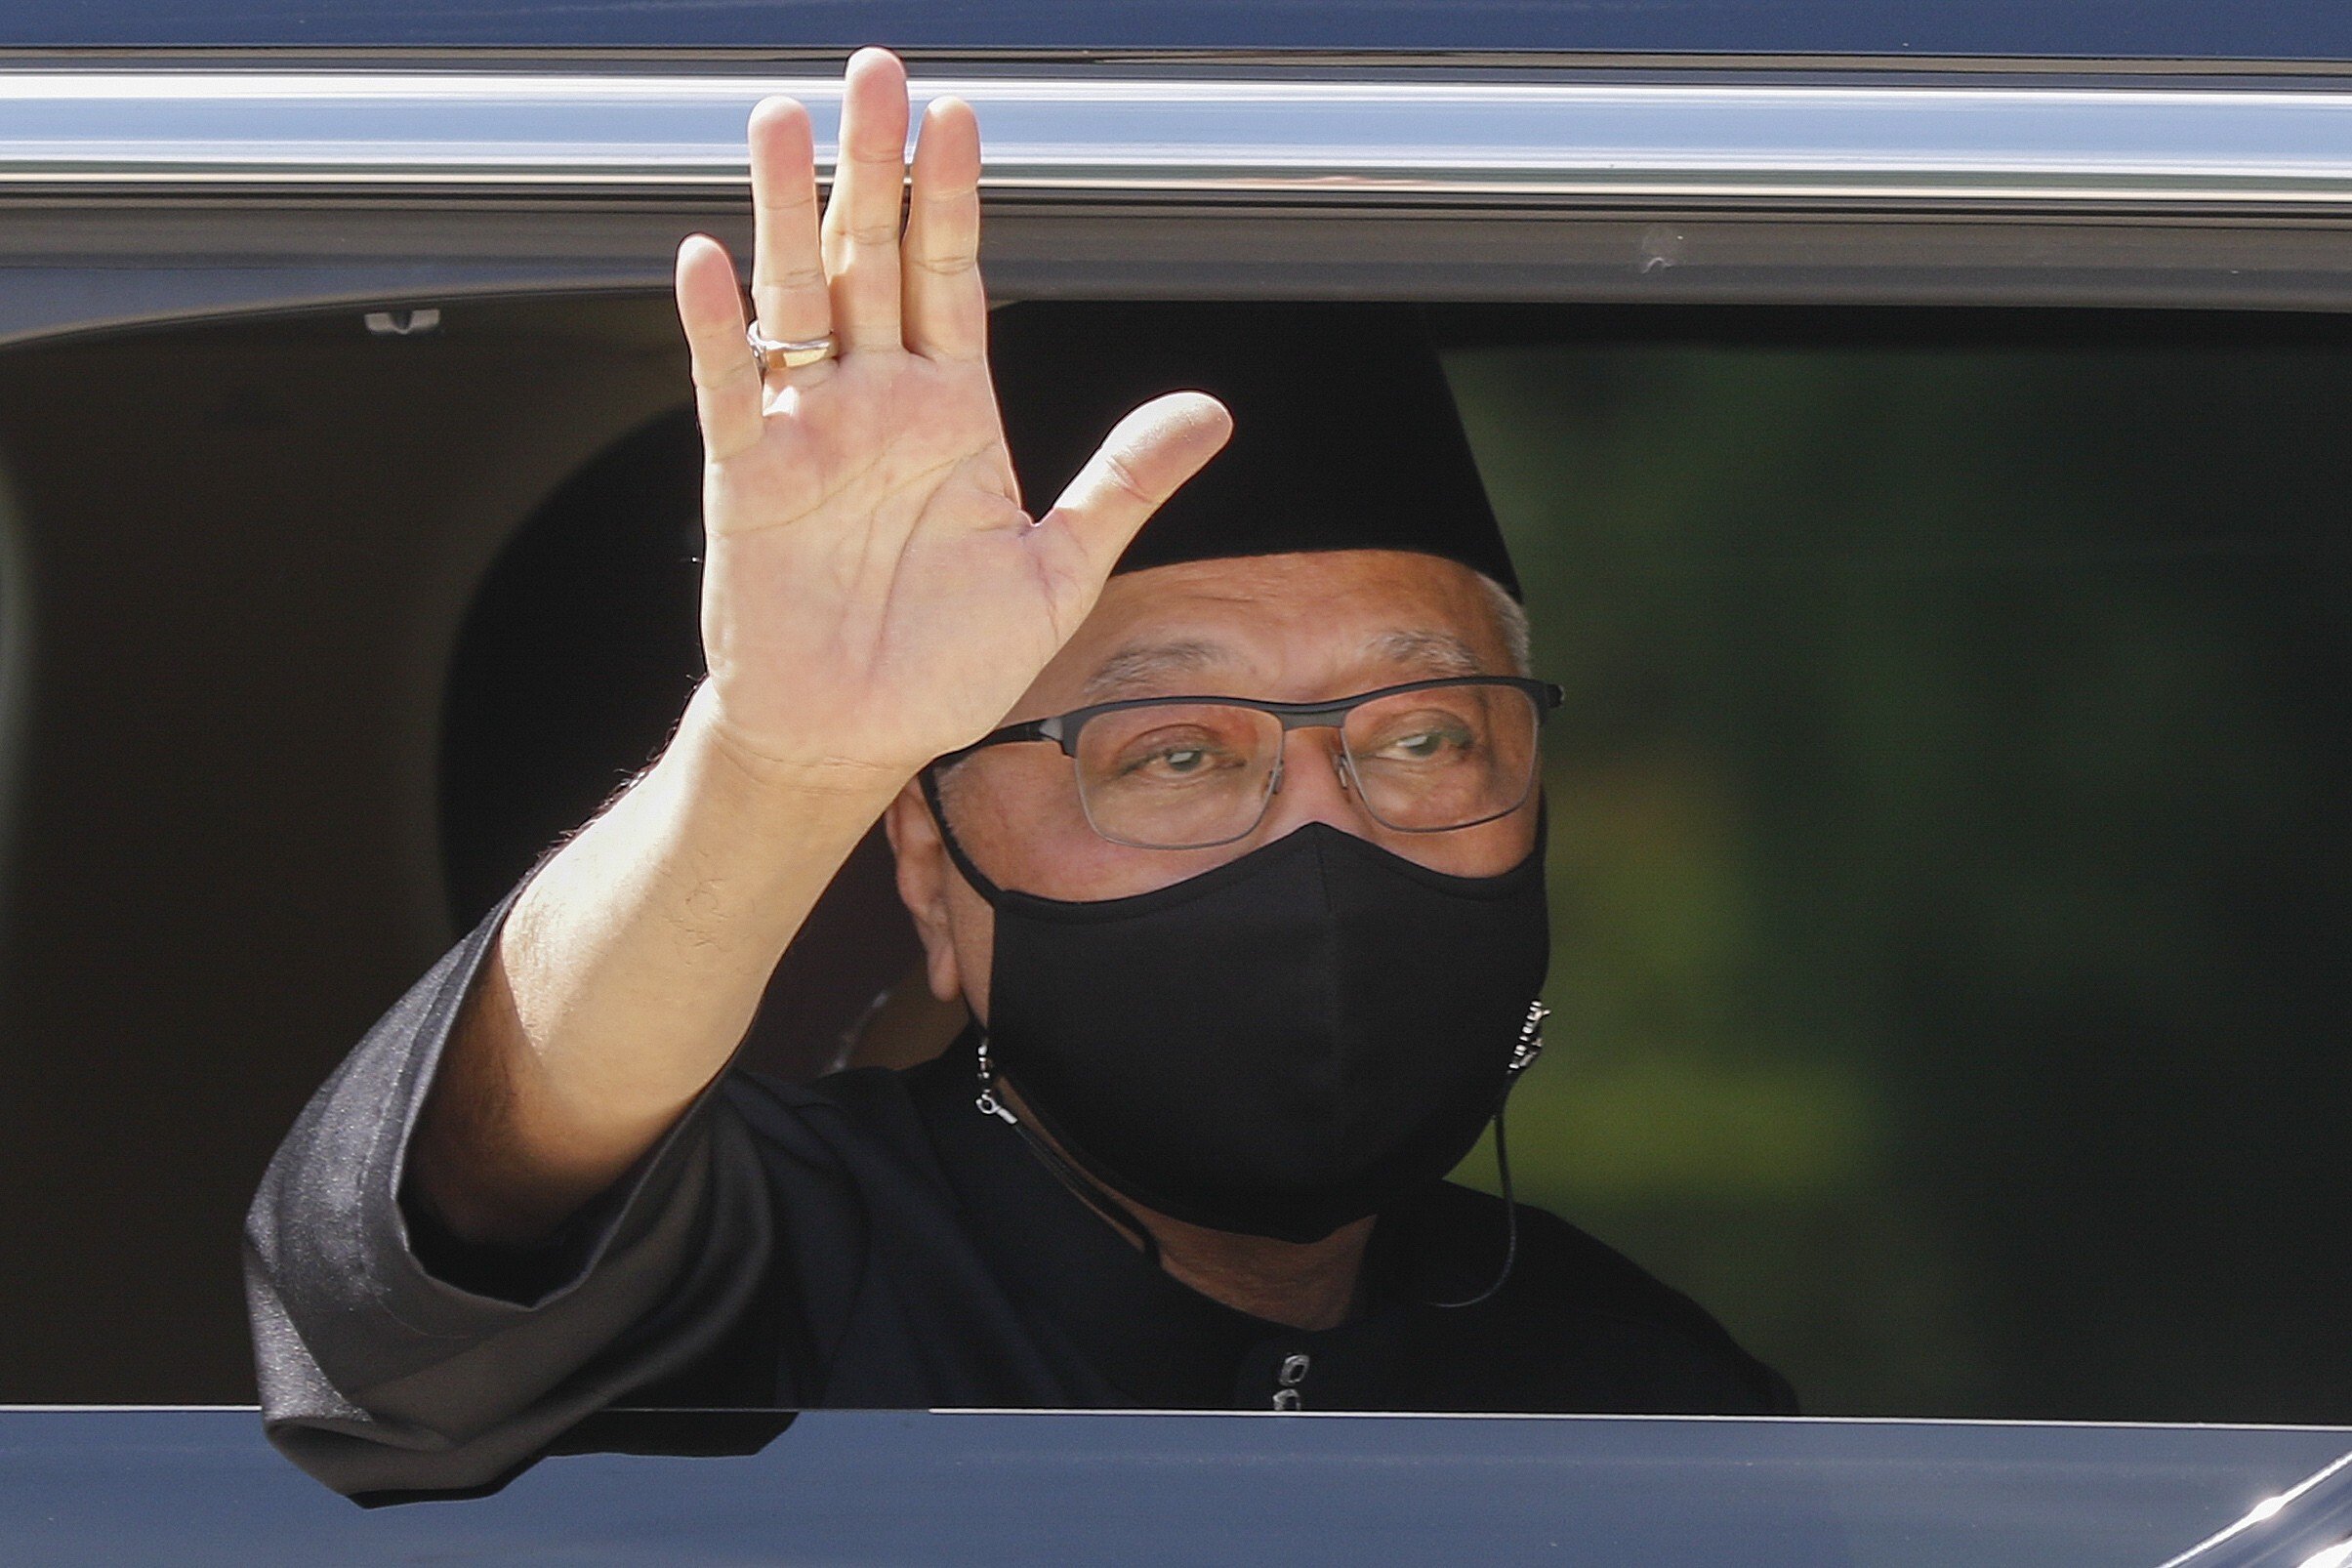 New Malaysian Prime Minister Ismail Sabri Yaakob waves from a vehicle as he leaves the National Palace after his swearing-in ceremony on Saturday. Photo: EPA-EFE